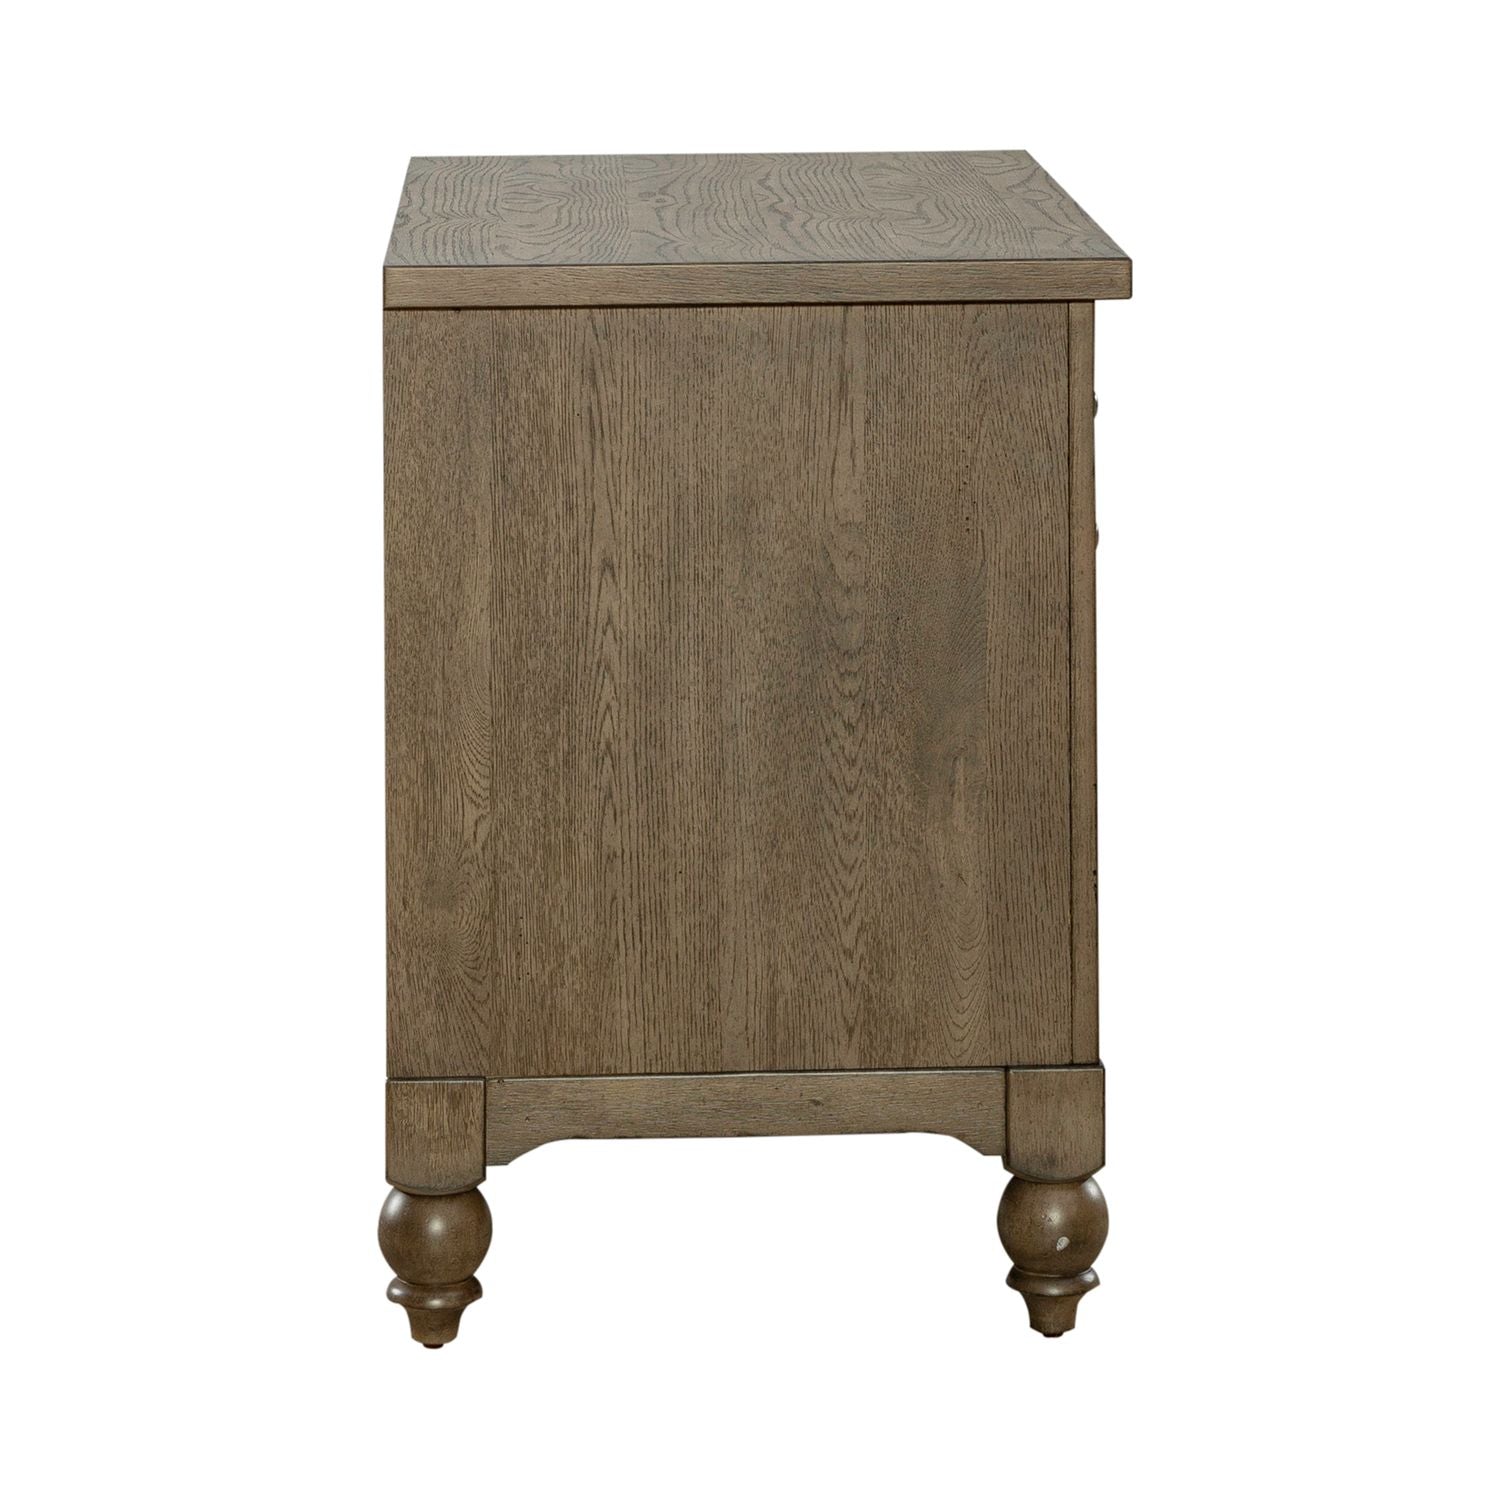 Braigh Lateral File Cabinet